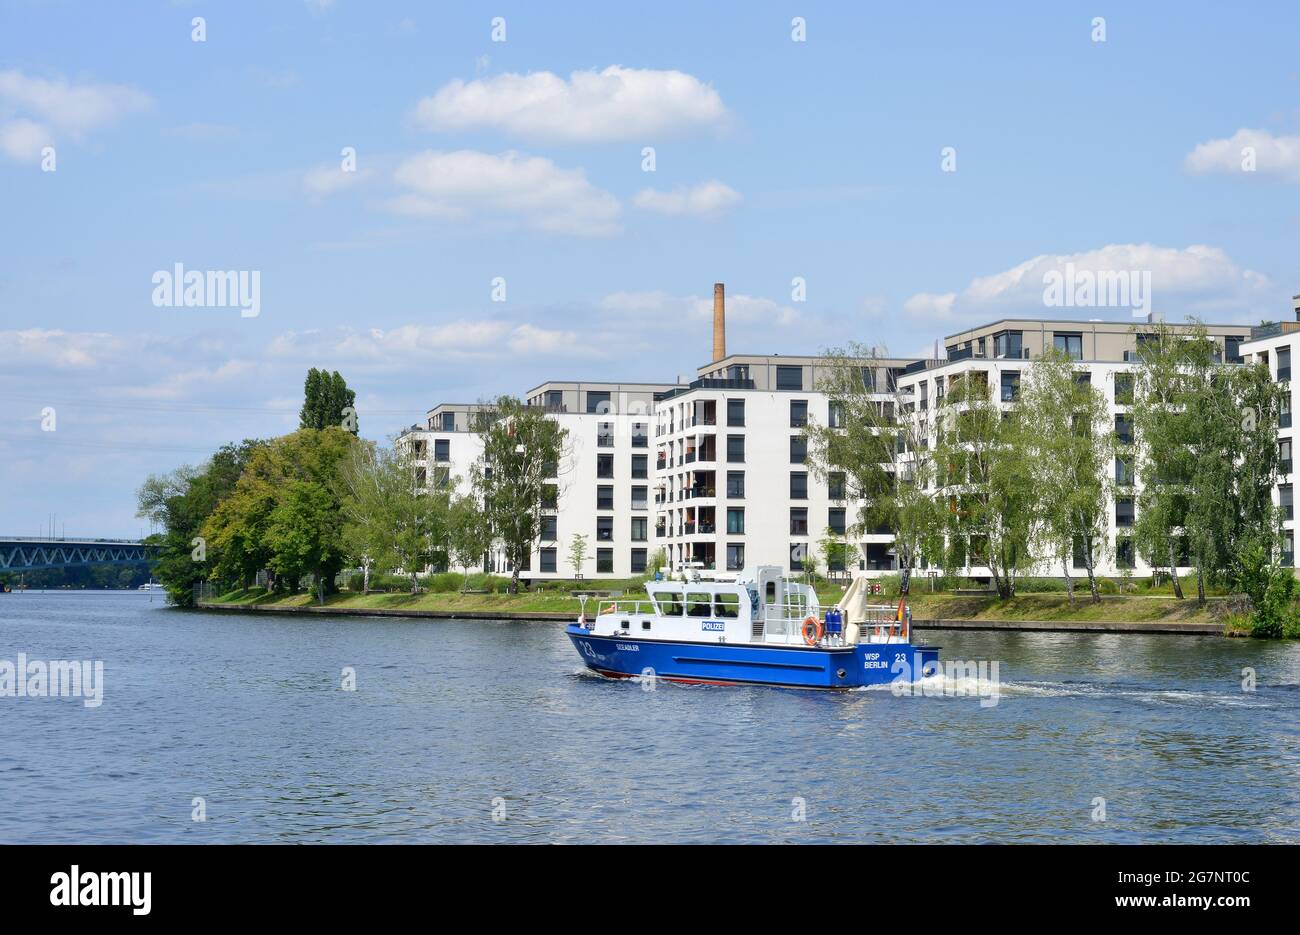 Berlin, Germany, a patrol boat of the water police passing on the river Spree new build apartment houses Stock Photo